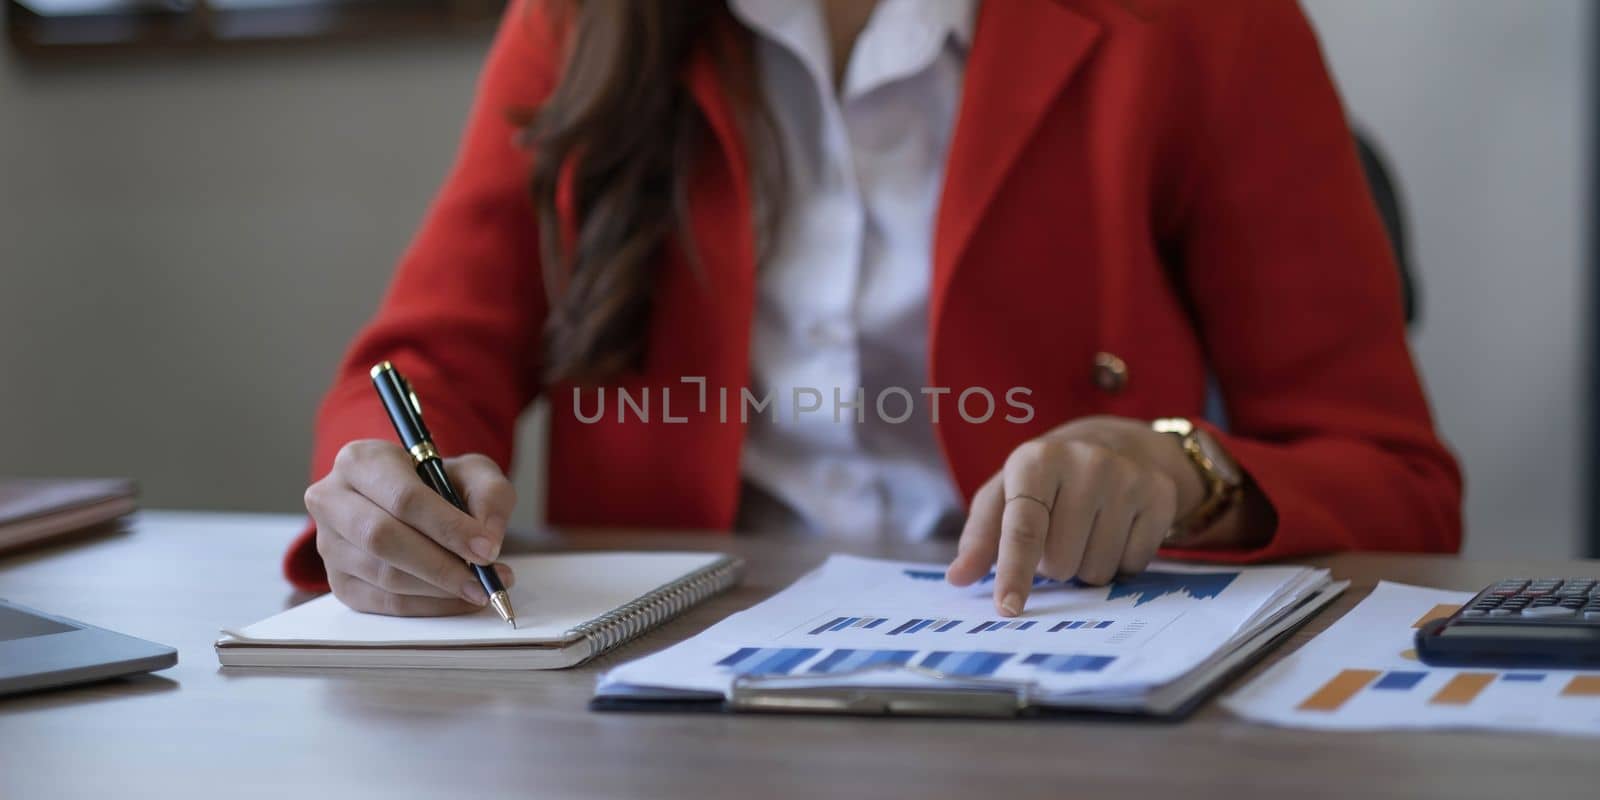 Asian Business woman using calculator and laptop for doing math finance on an office desk, tax, report, accounting, statistics, and analytical research concept..